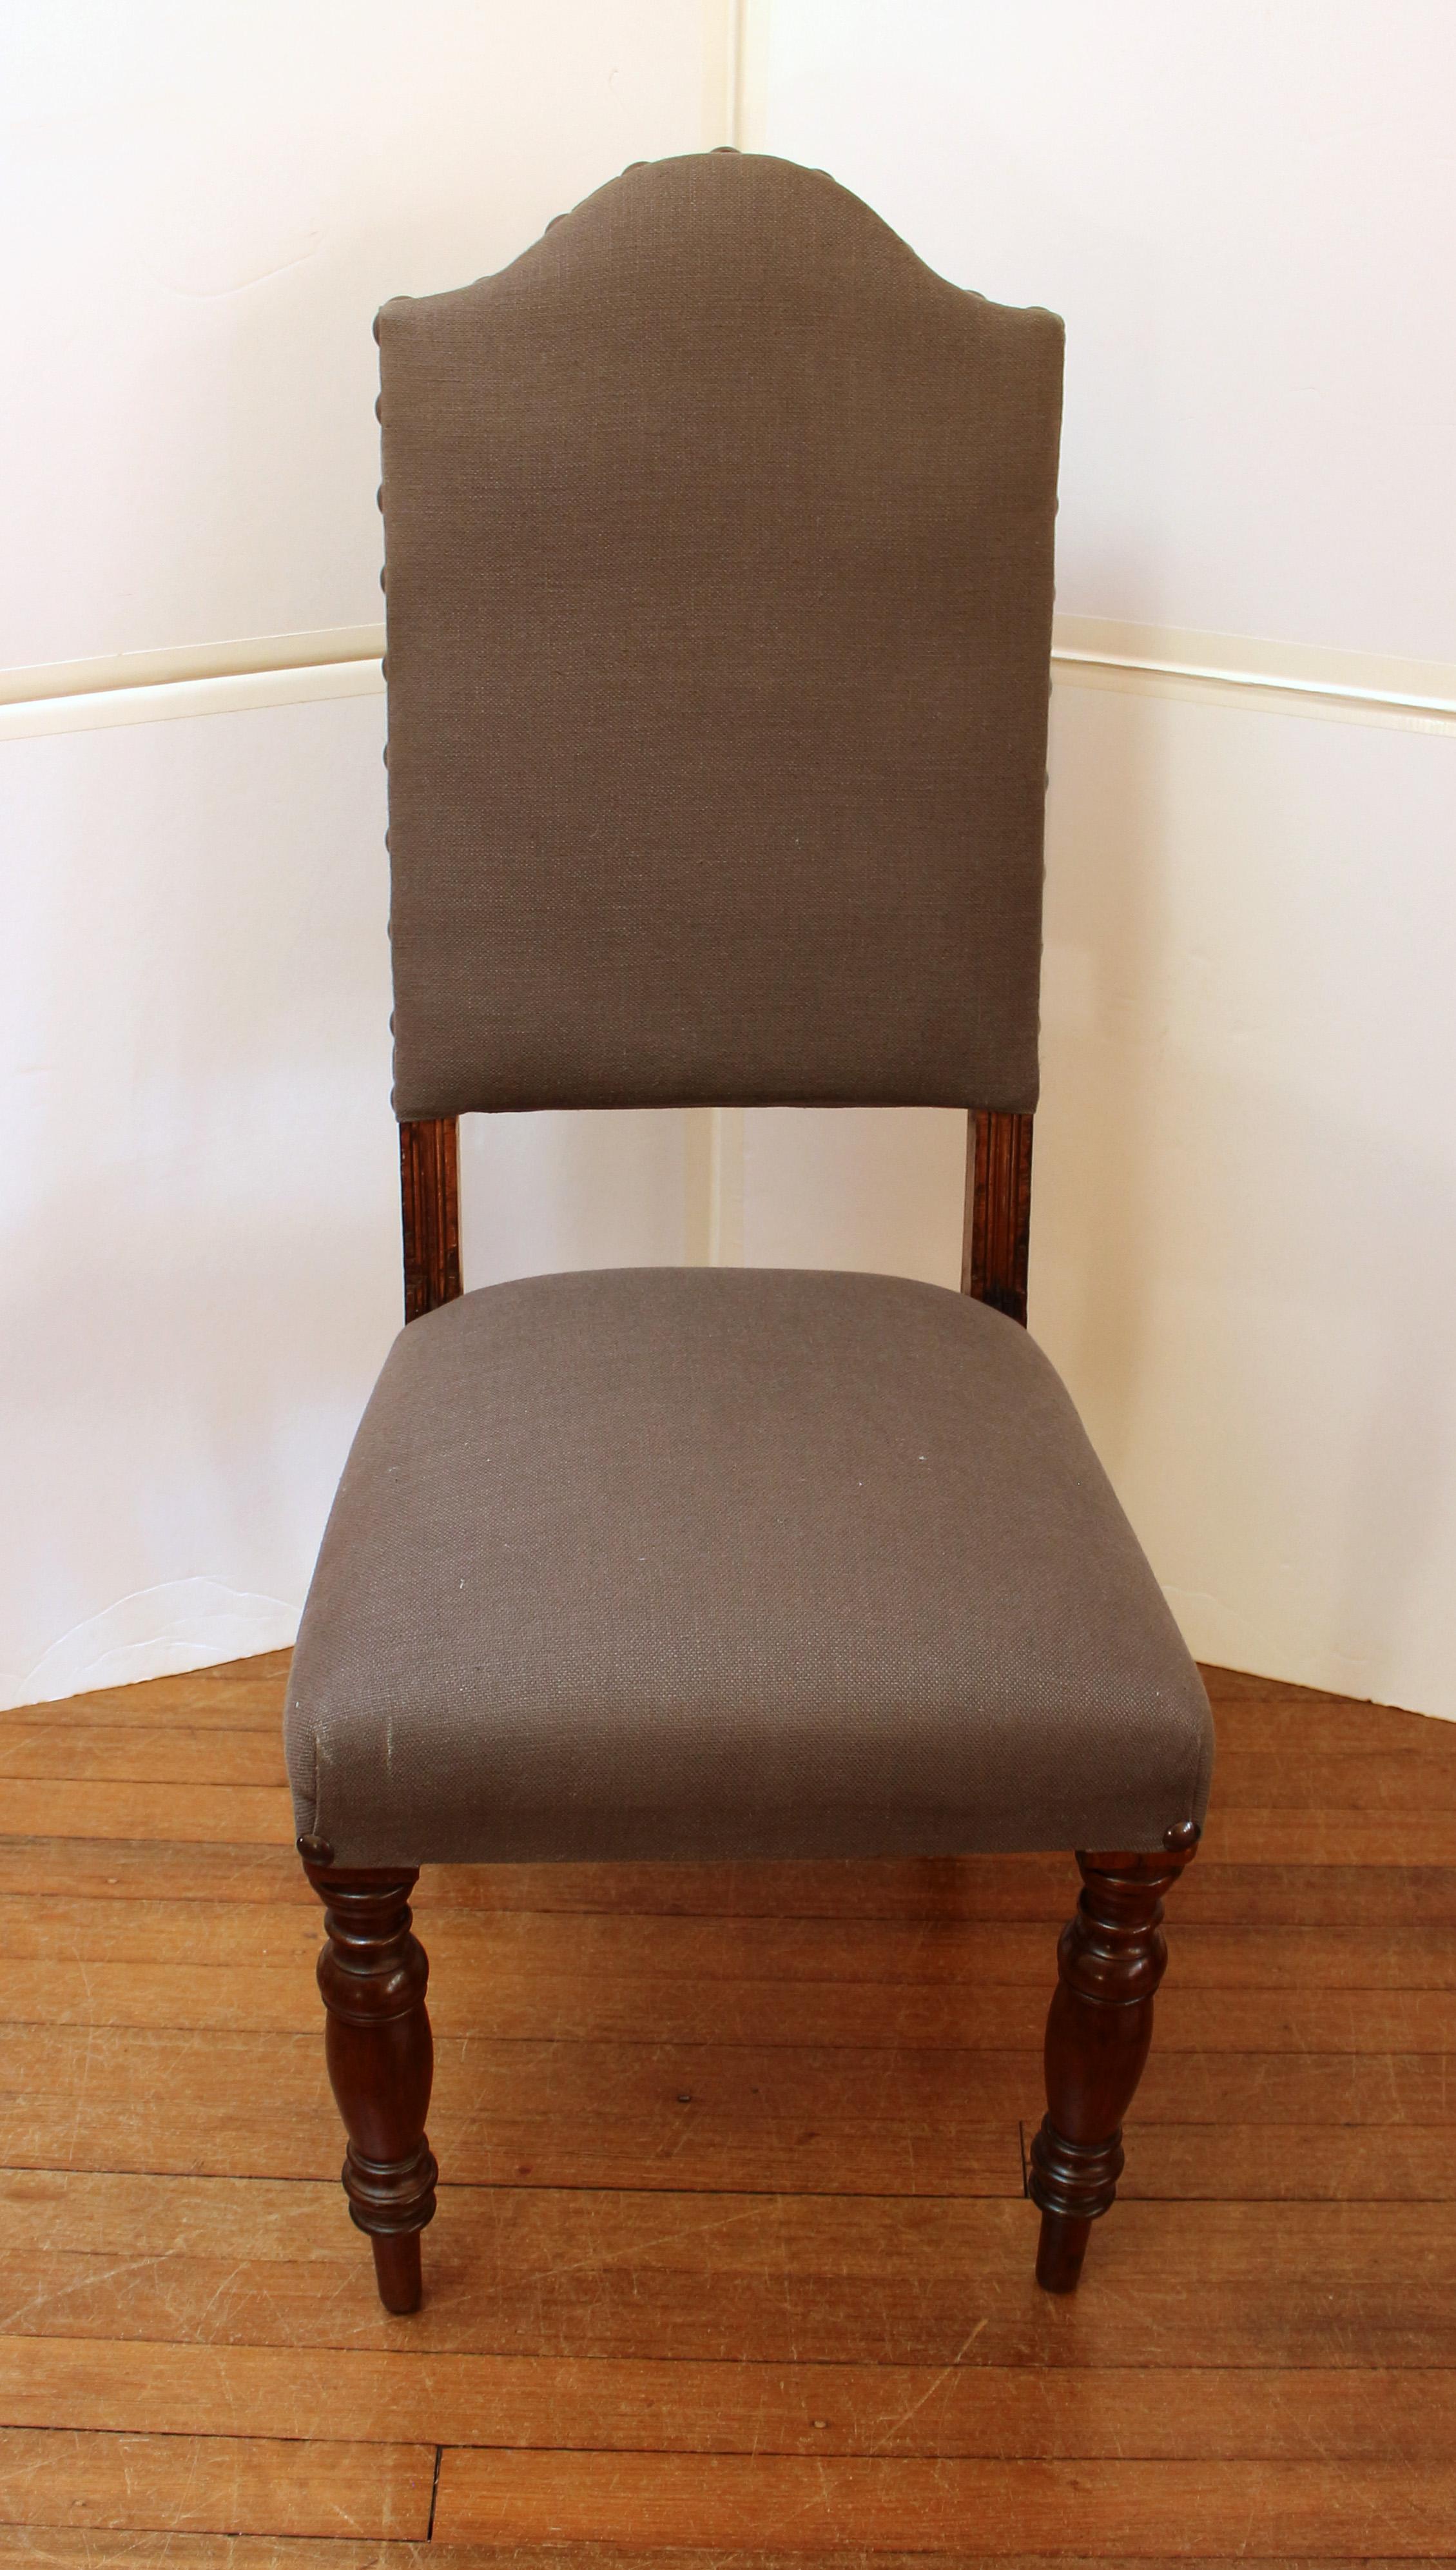 William IV, circa 1830-40s, set of 4 dining or side chairs, English. Shaped high upholstered backs. Robustly turned front legs, splayed back legs, mahogany. Attractively upholstered with large studs accenting the backs. 43 1/4